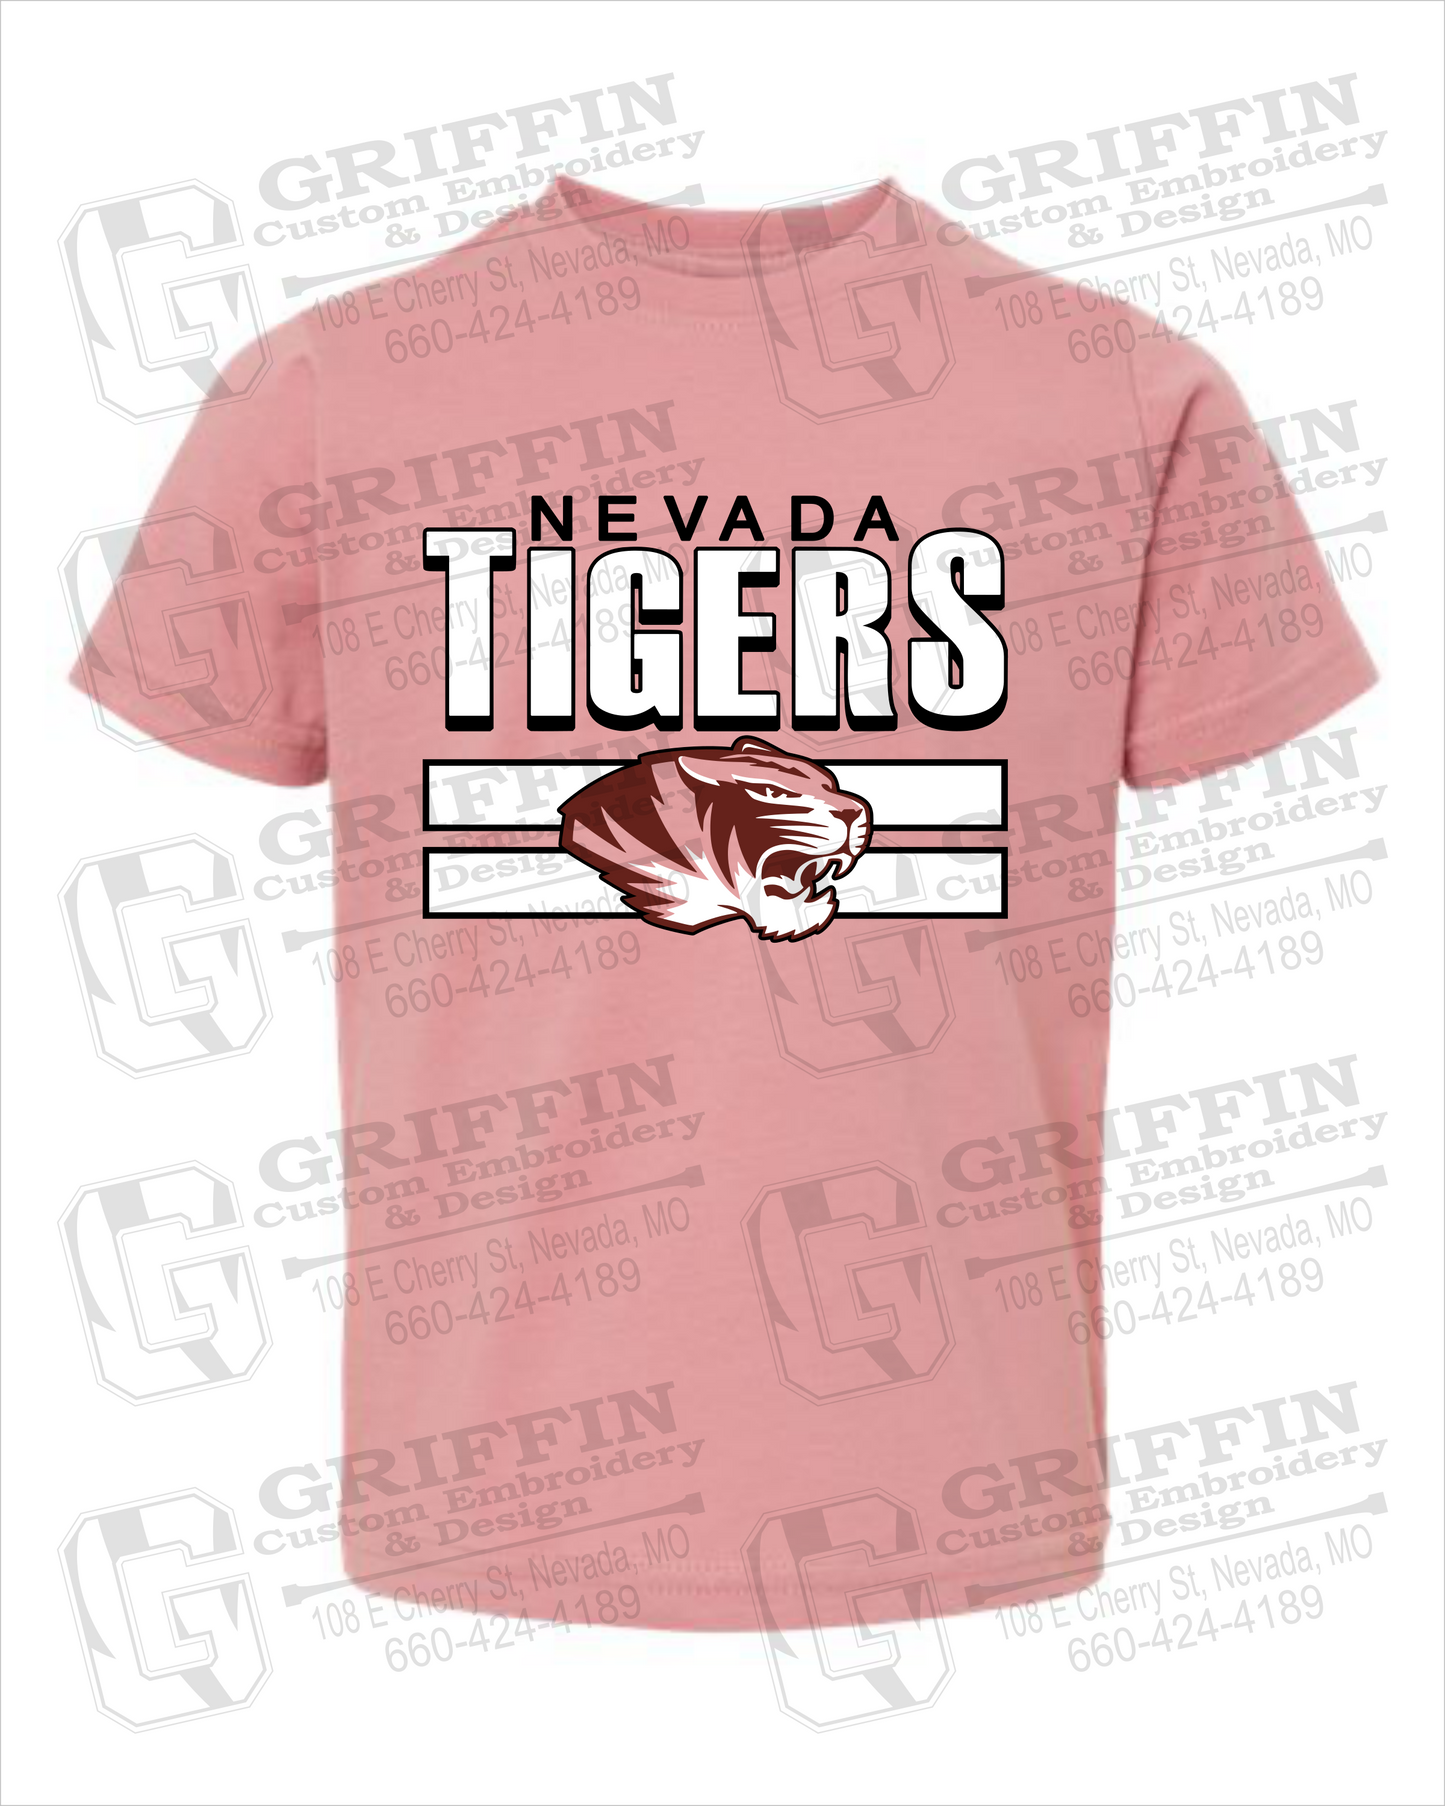 Nevada Tigers 22-B Toddler/Infant T-Shirt